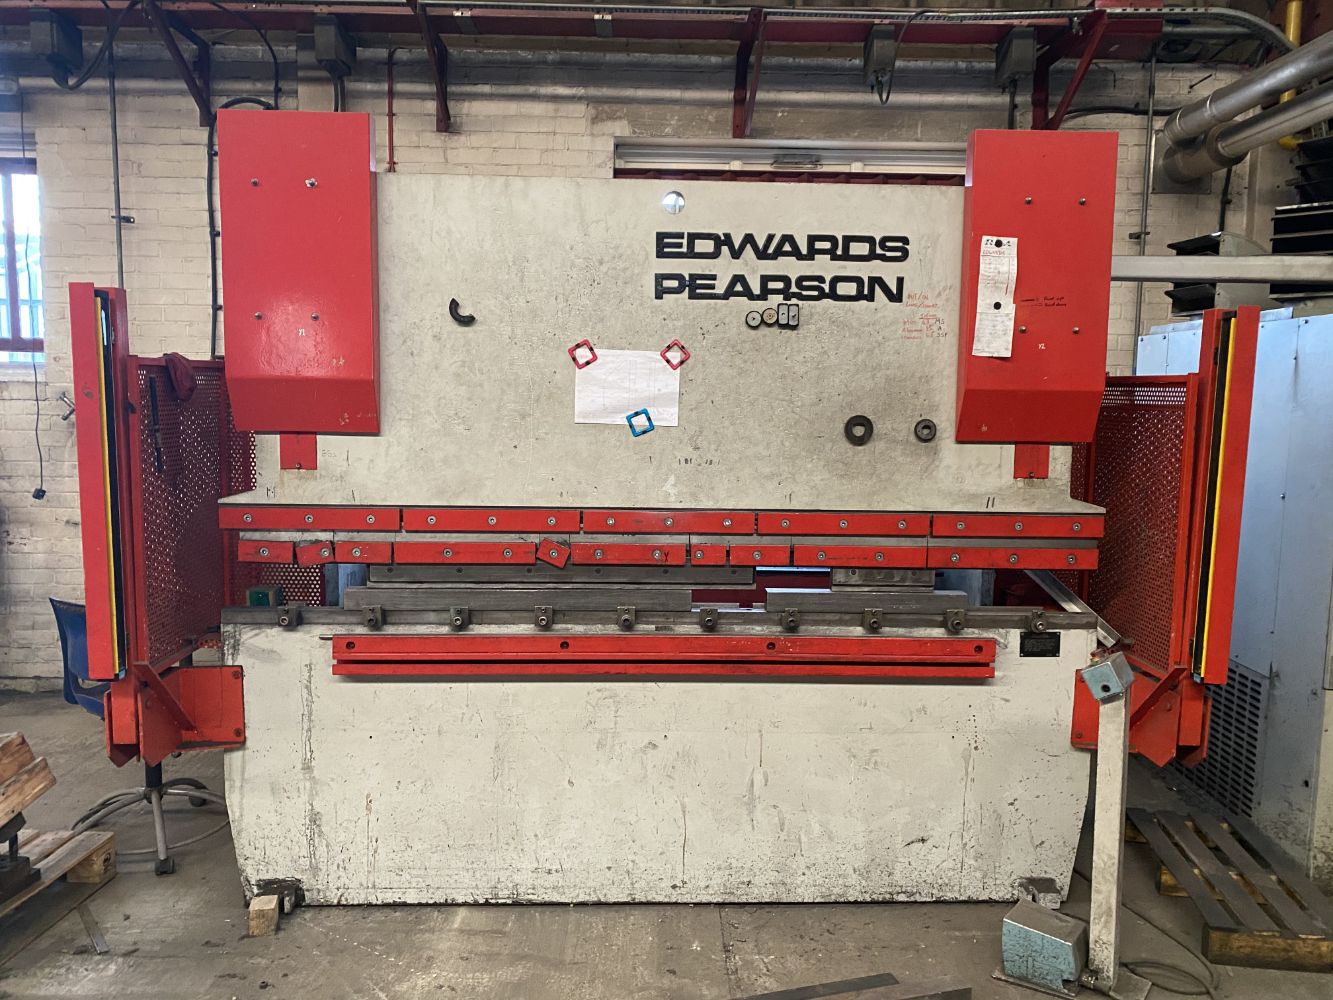 **SALE** Fabrications & Engineering Machinery Firm Closing Down **SALE**